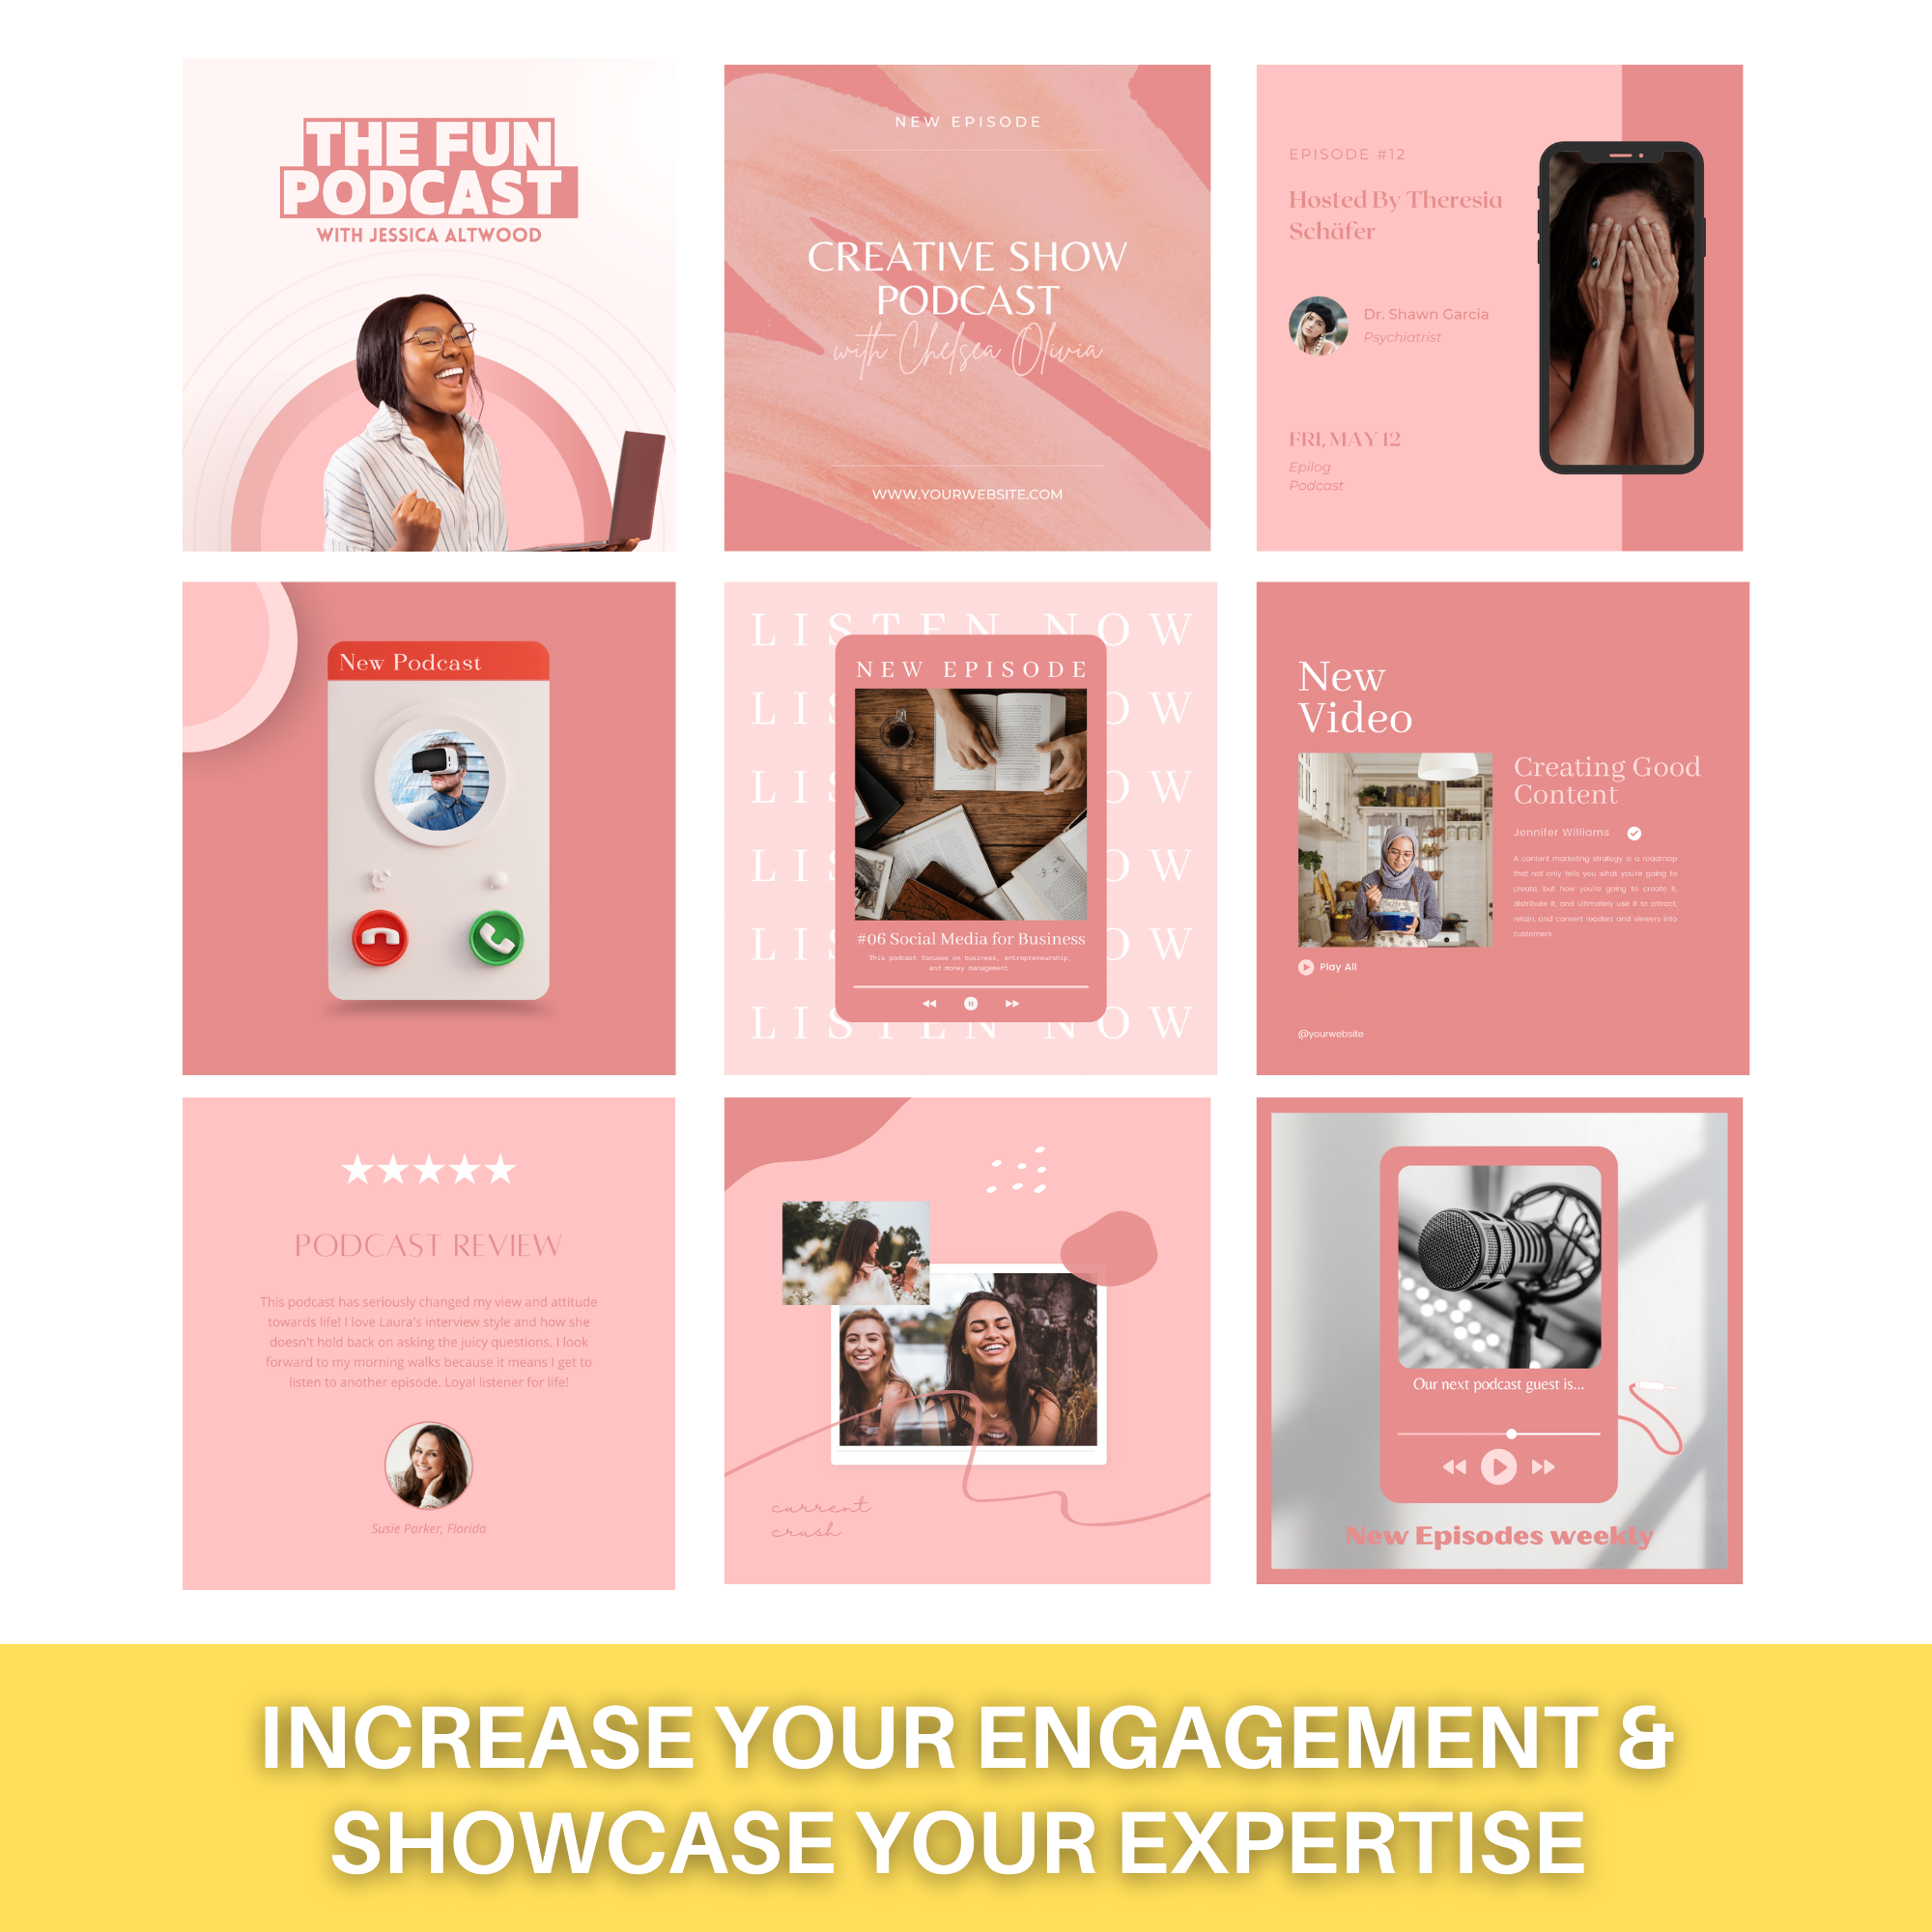 Done-For-You 30 Days Podcast Promo Templates for Instagram